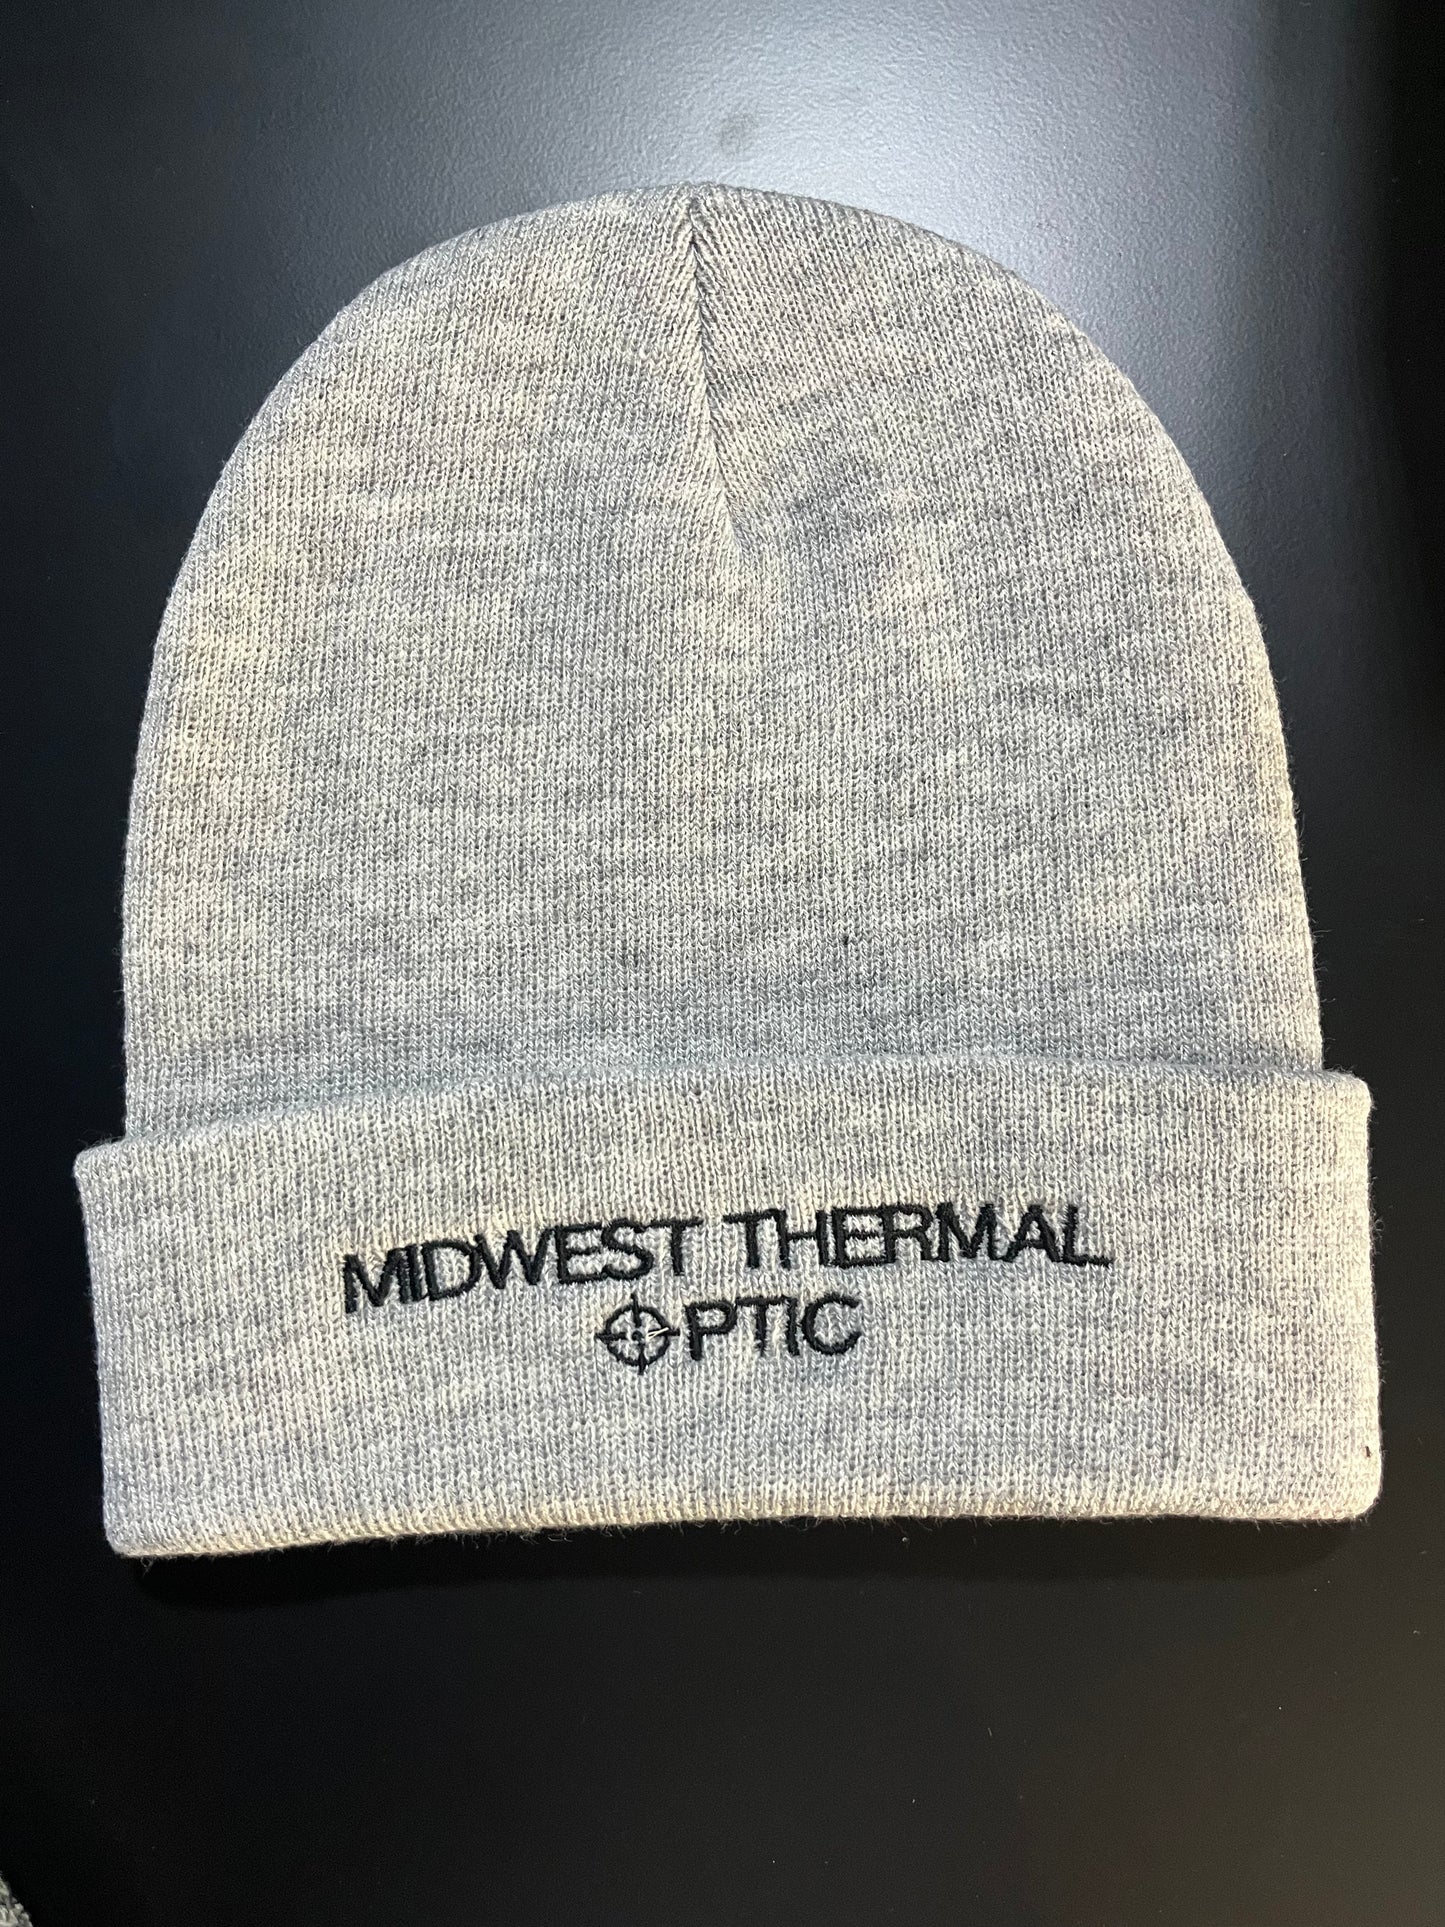 Midwest Thermal Optics Embroidered Beanie/Hat